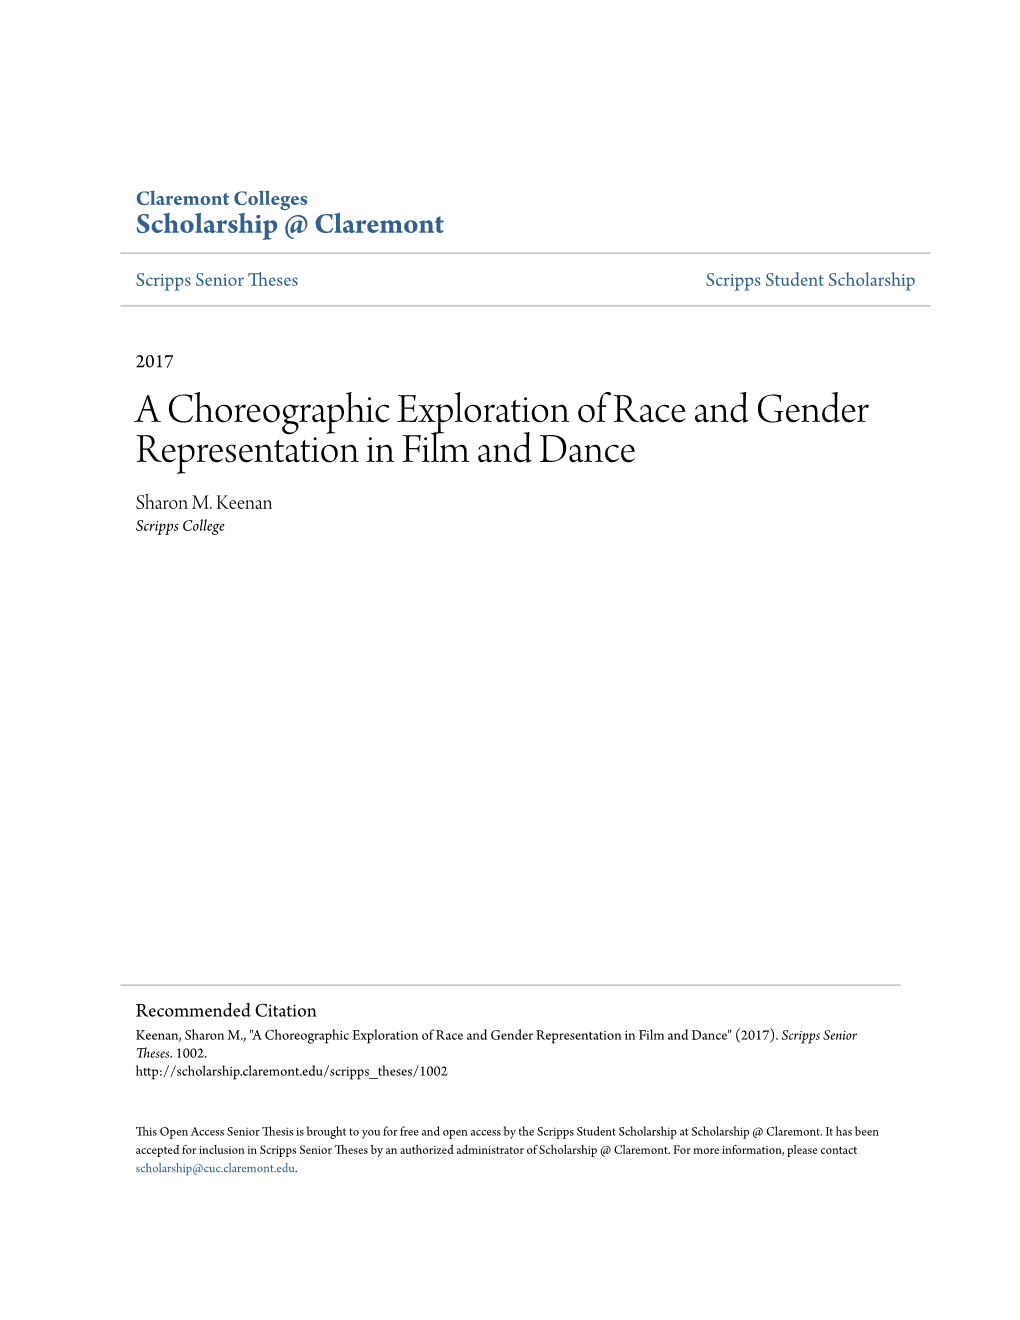 A Choreographic Exploration of Race and Gender Representation in Film and Dance Sharon M